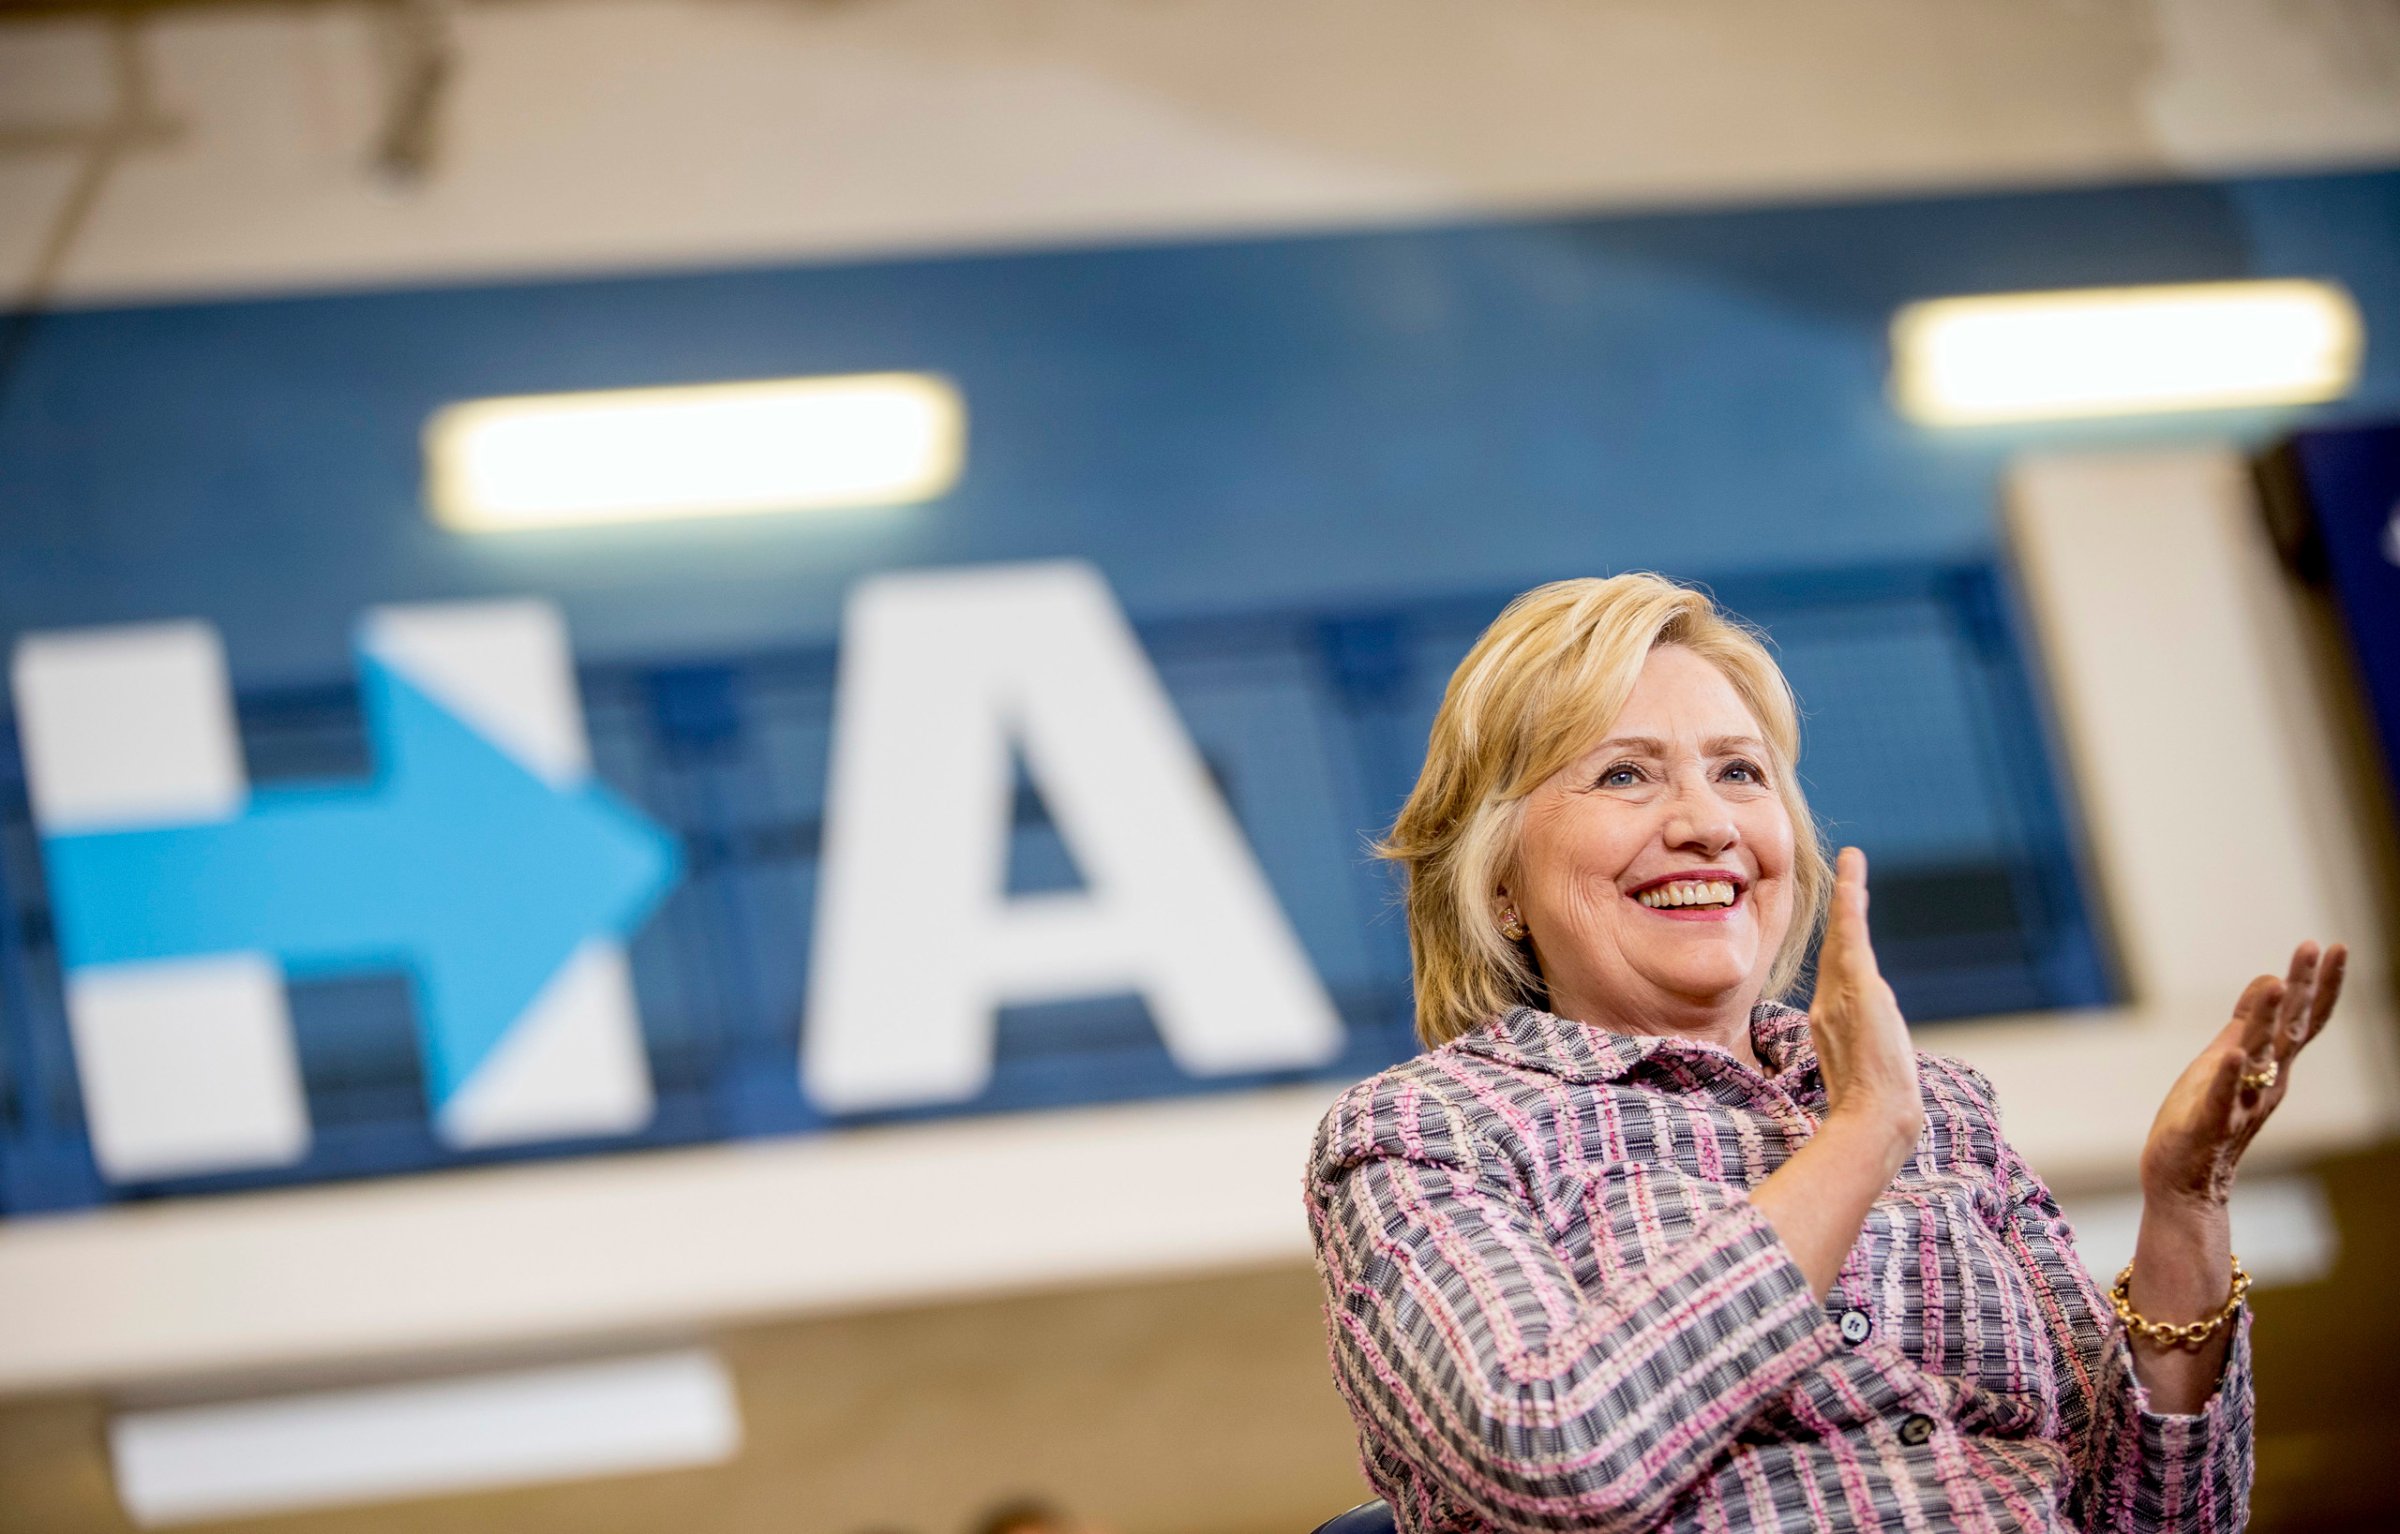 Democratic presidential candidate Hillary Clinton applauds as she sits on stage at a rally at Omaha North High Magnet School in Omaha, Neb. on Aug. 1, 2016.